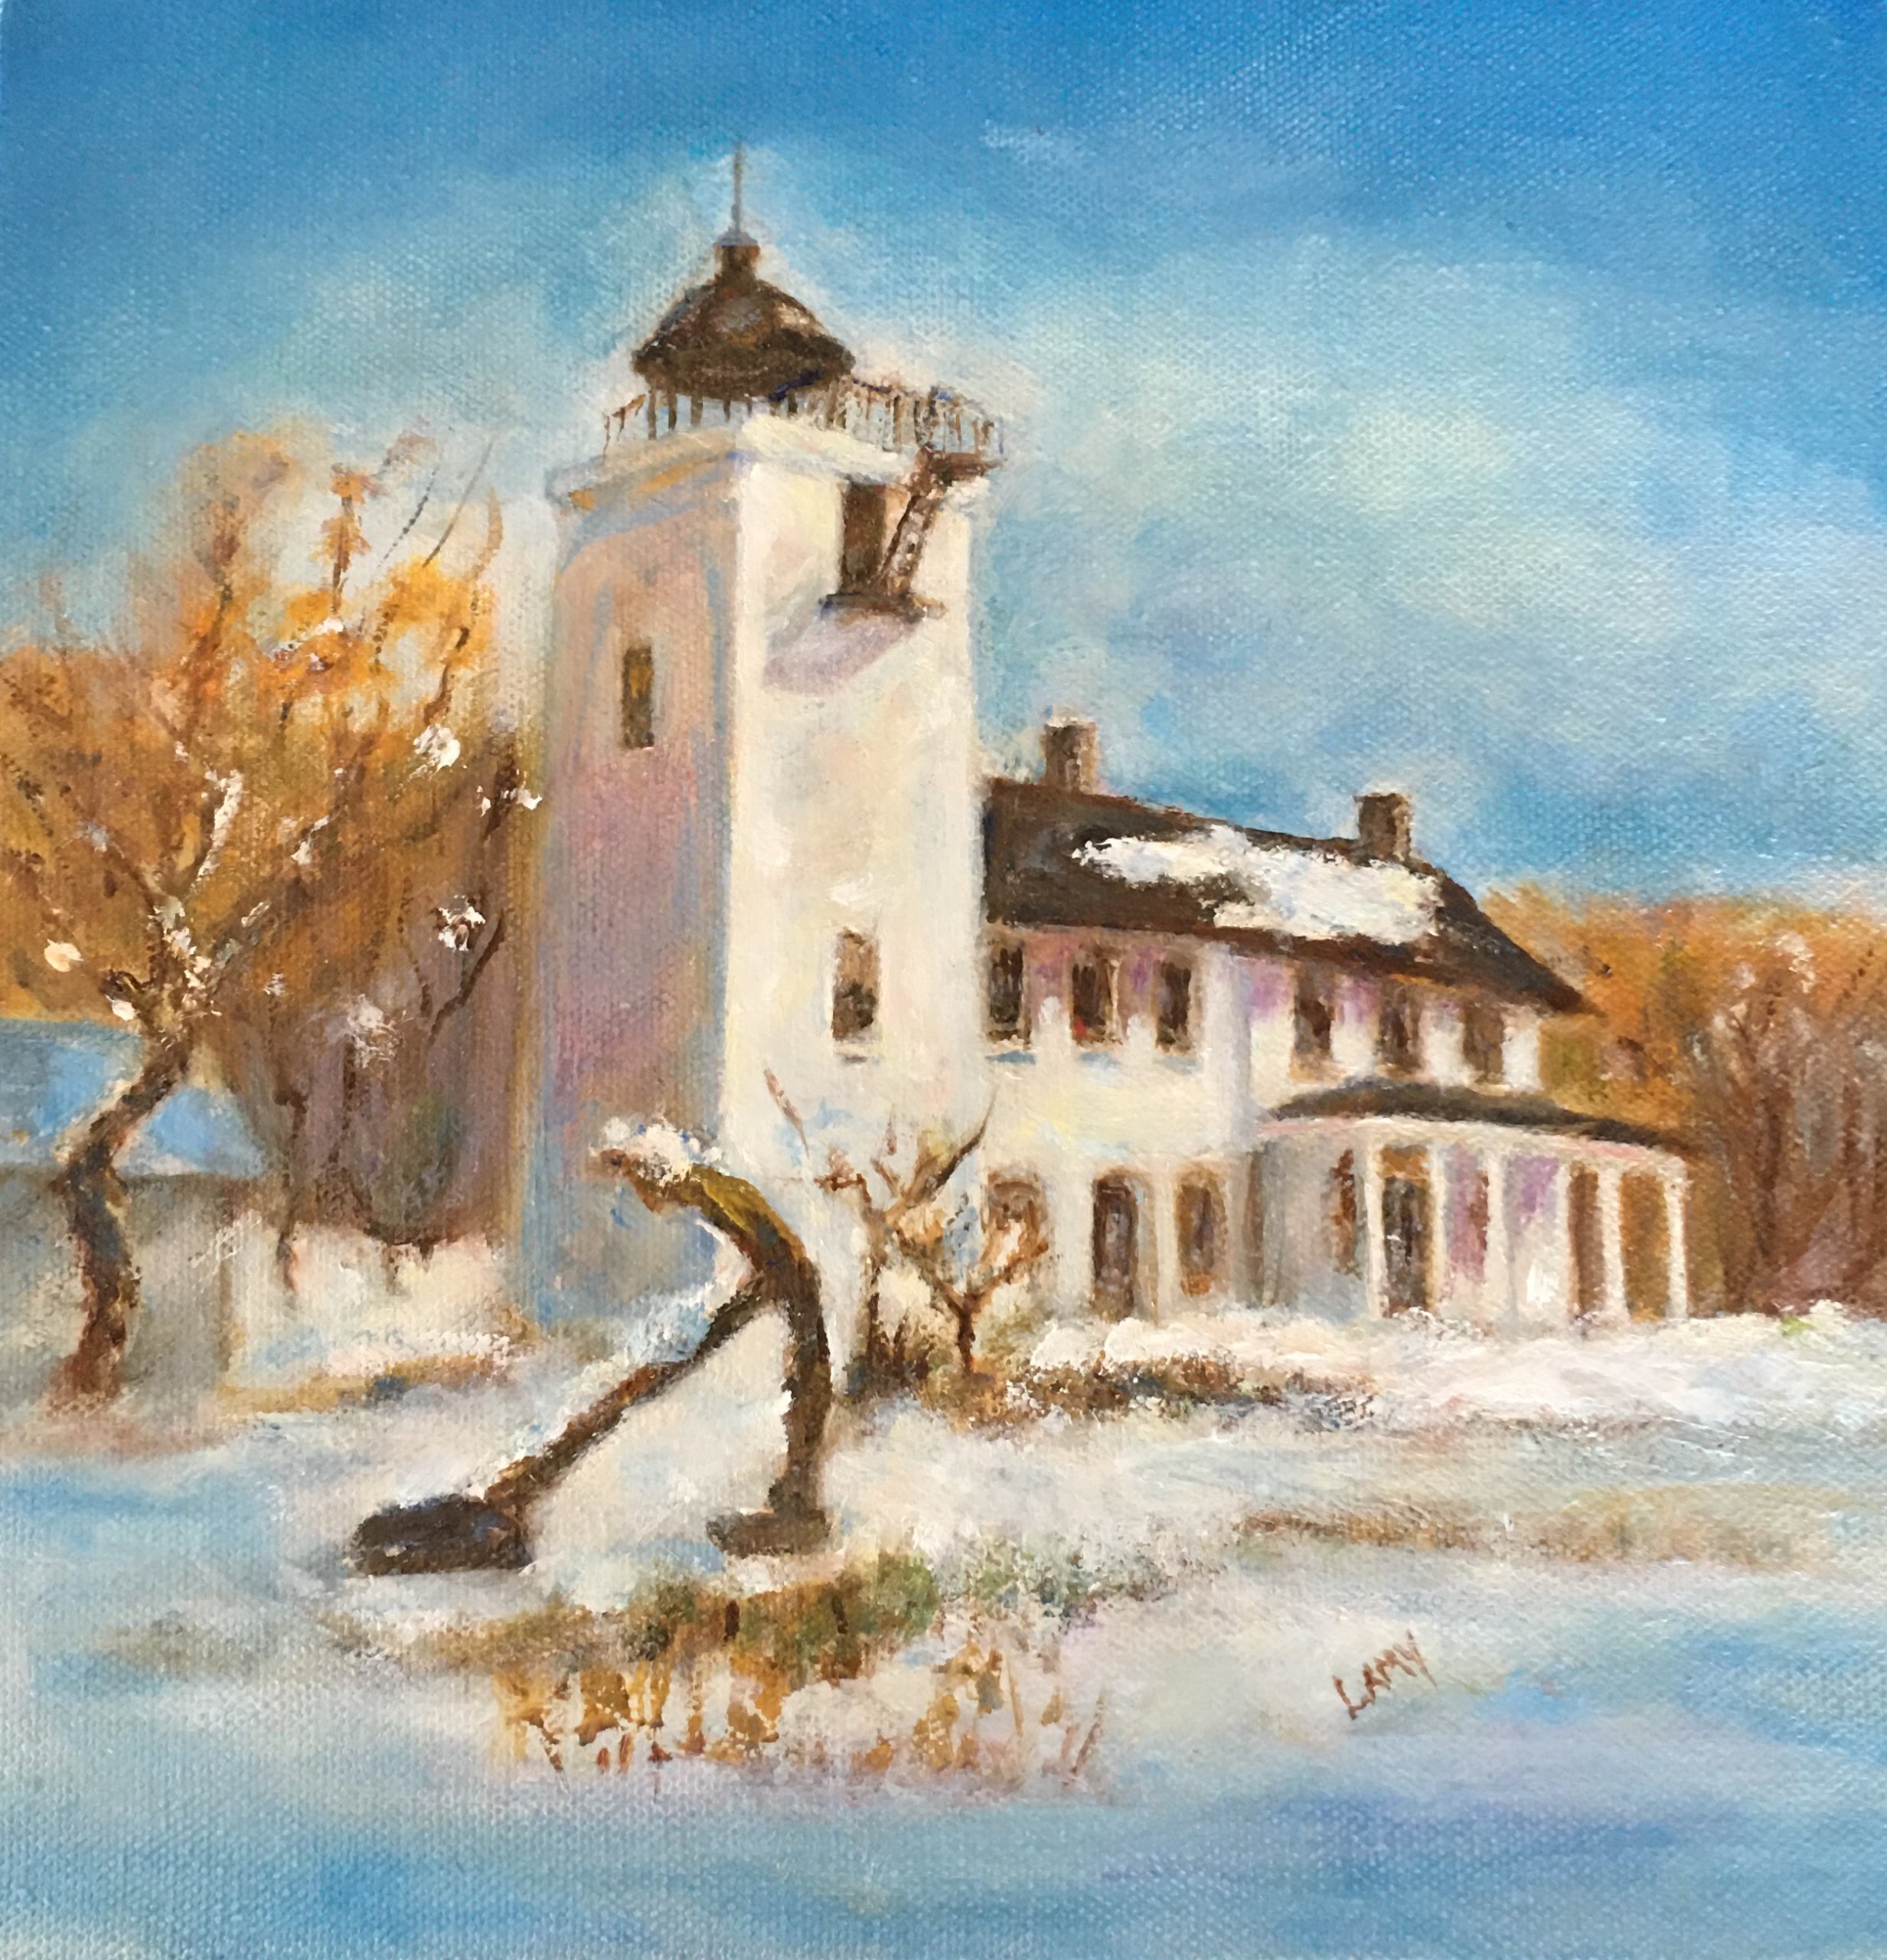 "Horton Pt Lighthouse After Snowfall" by Marilyn Lamy, Oil on Canvas in Ten Squared